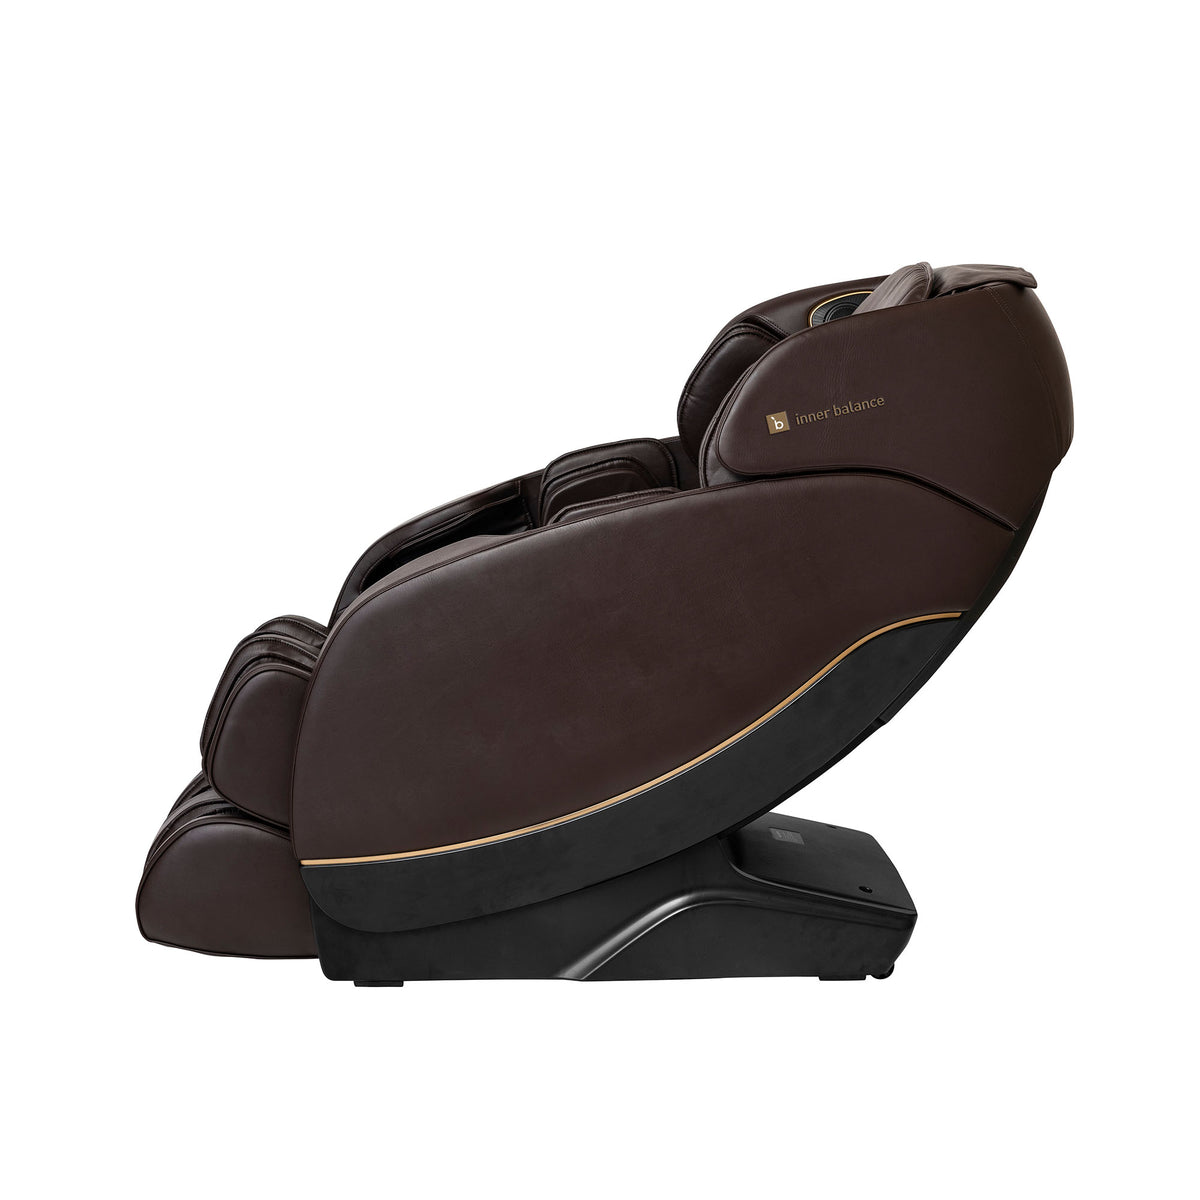 Inner Balance Wellness Jin 2.0 Massage Chair in brown leather finish